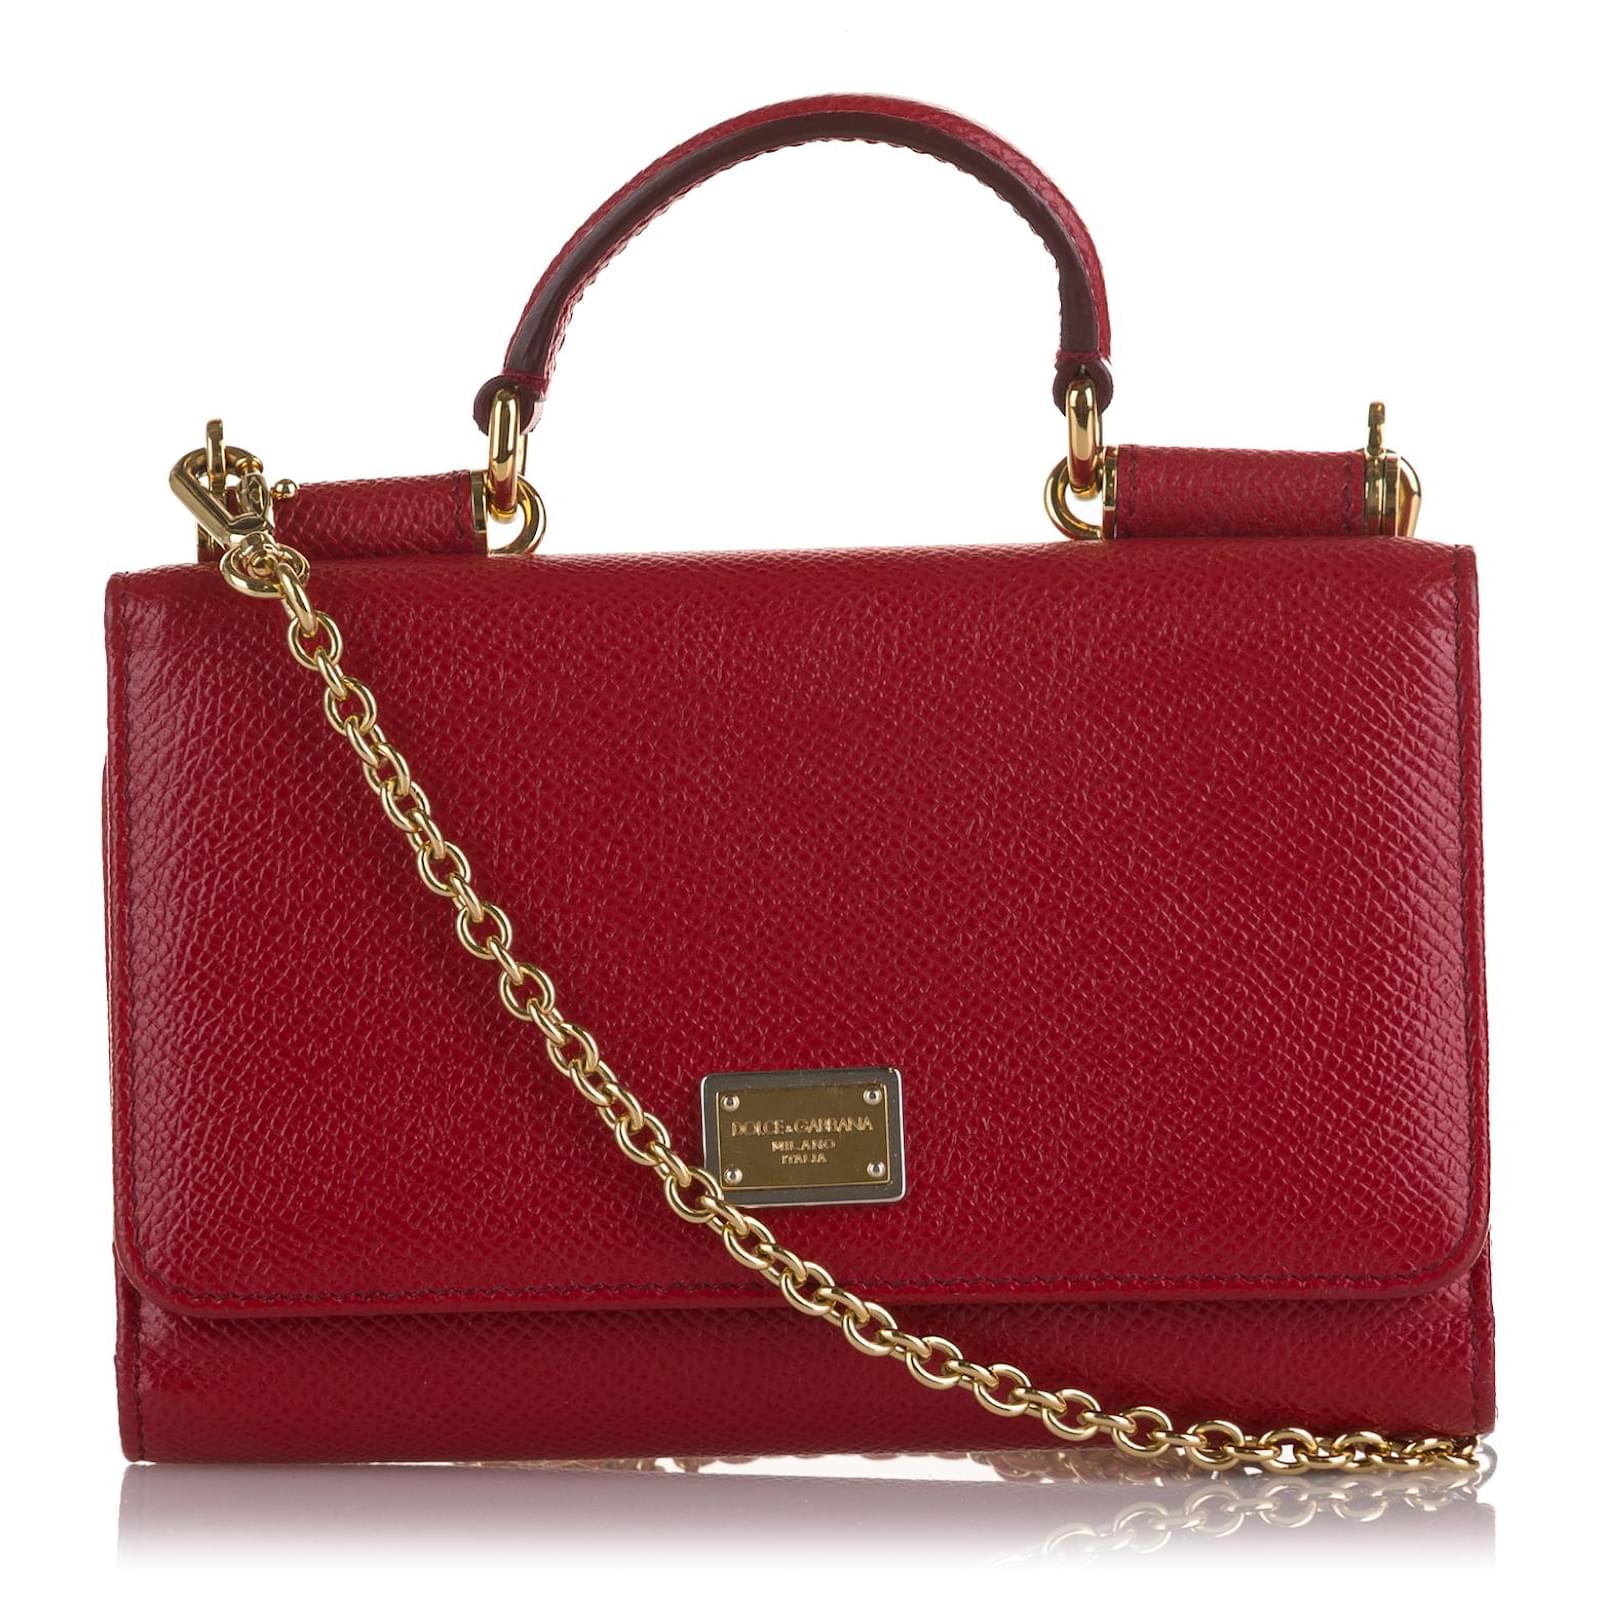 Dolce & Gabbana, Bags, Dolce Gabbana Small Sicily Leather Top Handle Bag